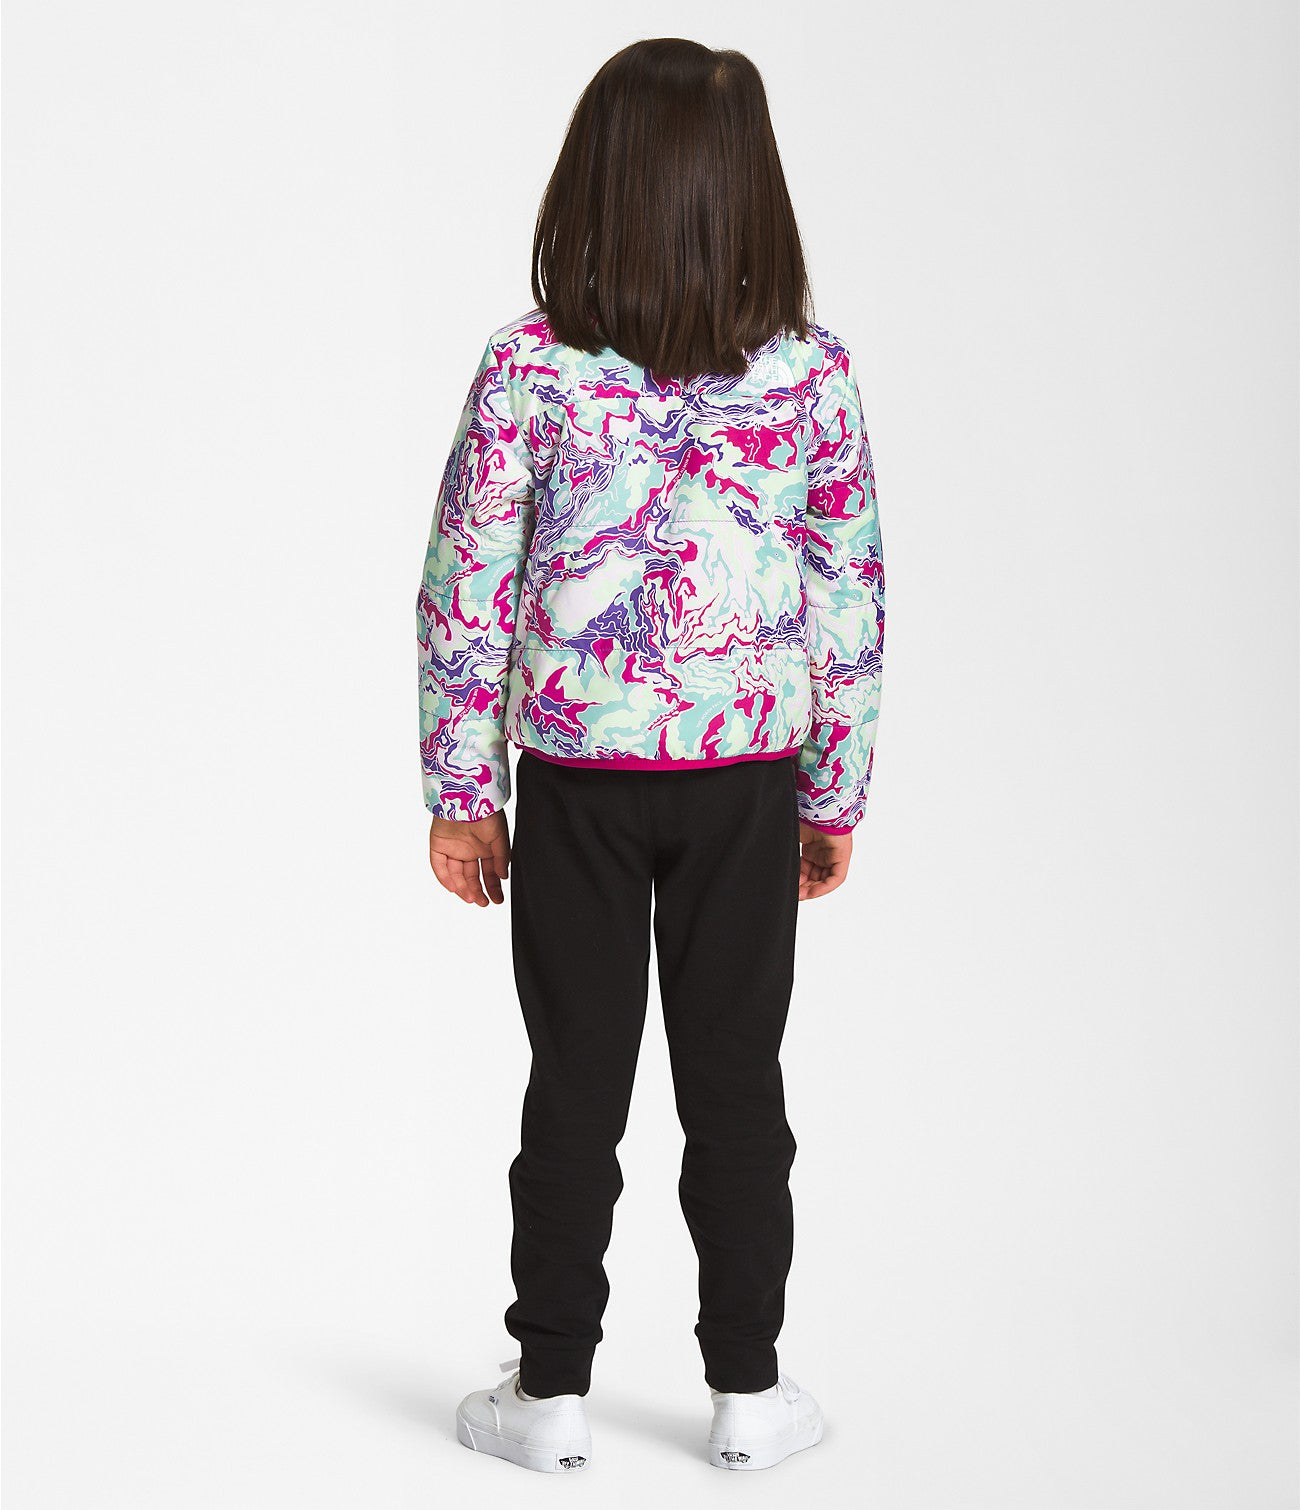 The North Face Kids' Reversible Mossbud Jacket